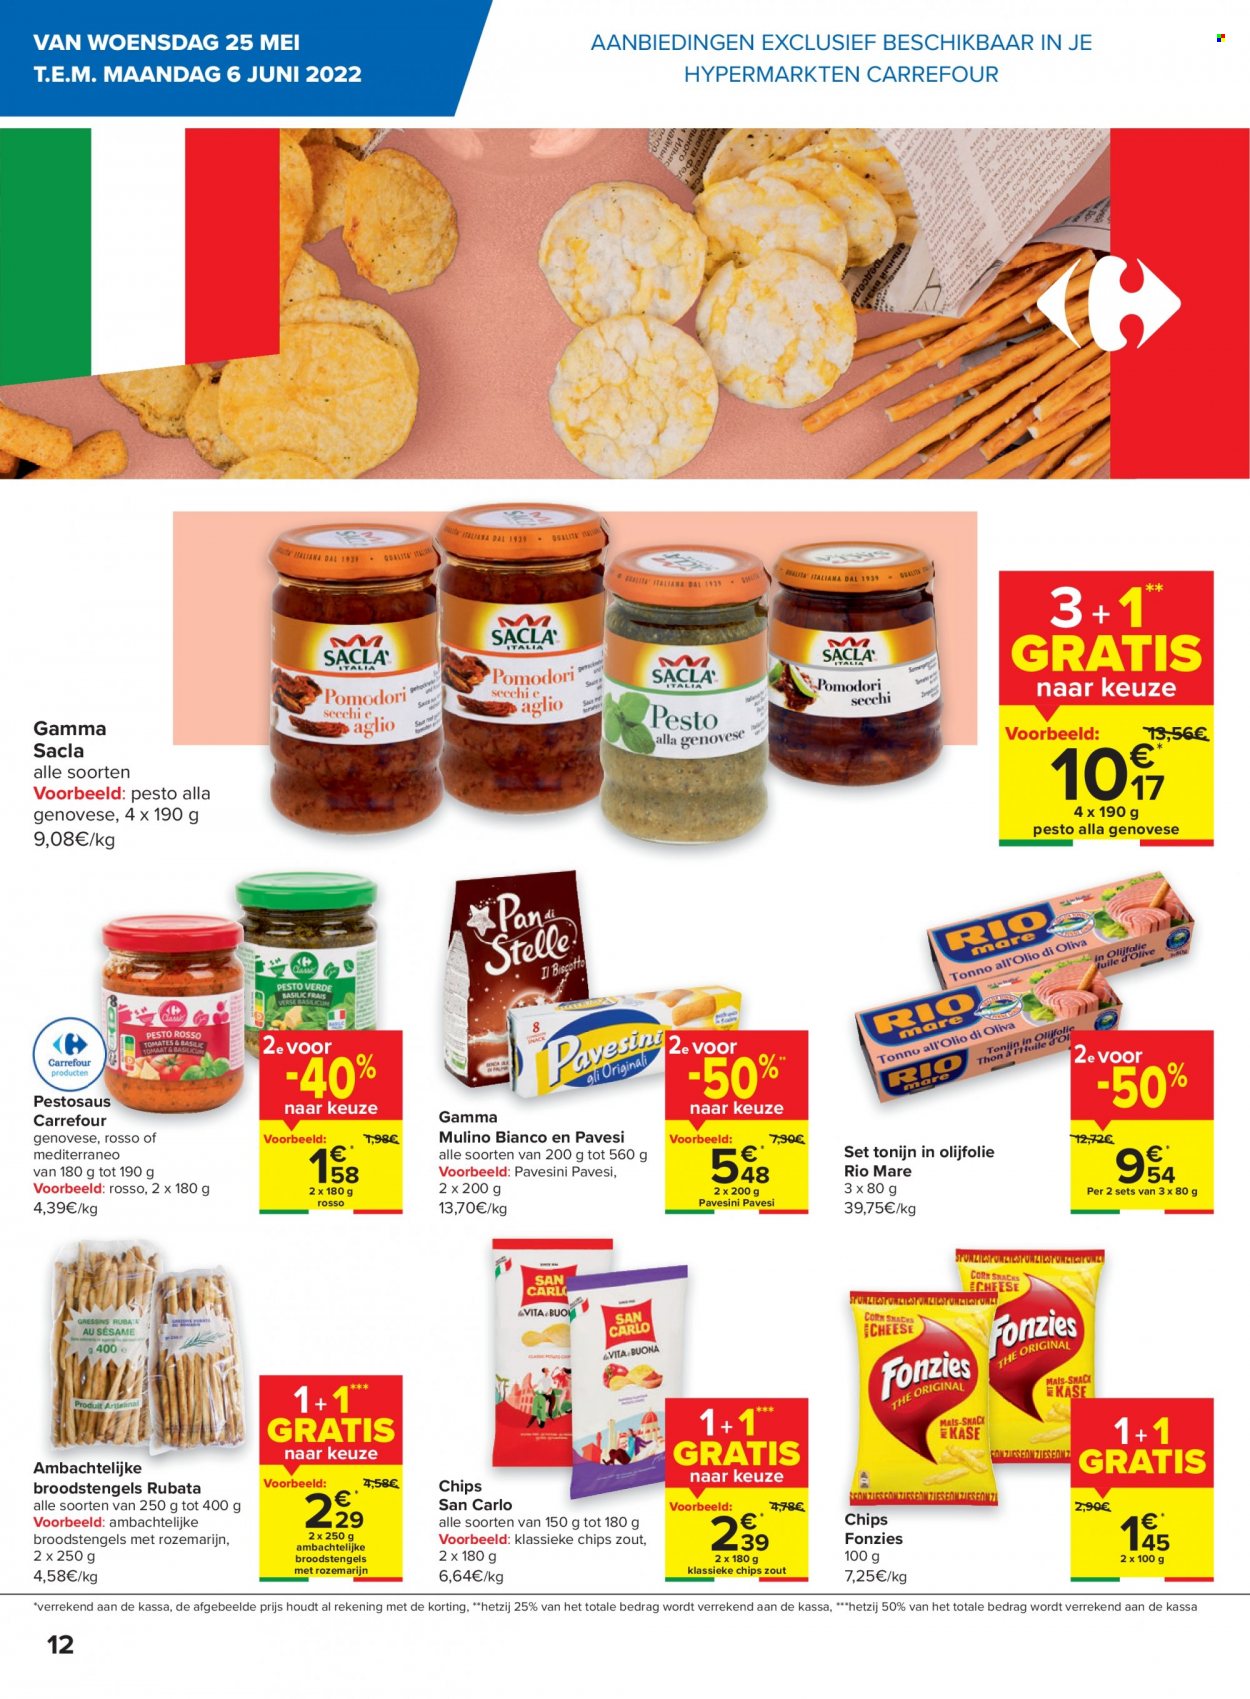 Catalogue Carrefour hypermarkt - 24.5.2022 - 30.5.2022. Page 12.